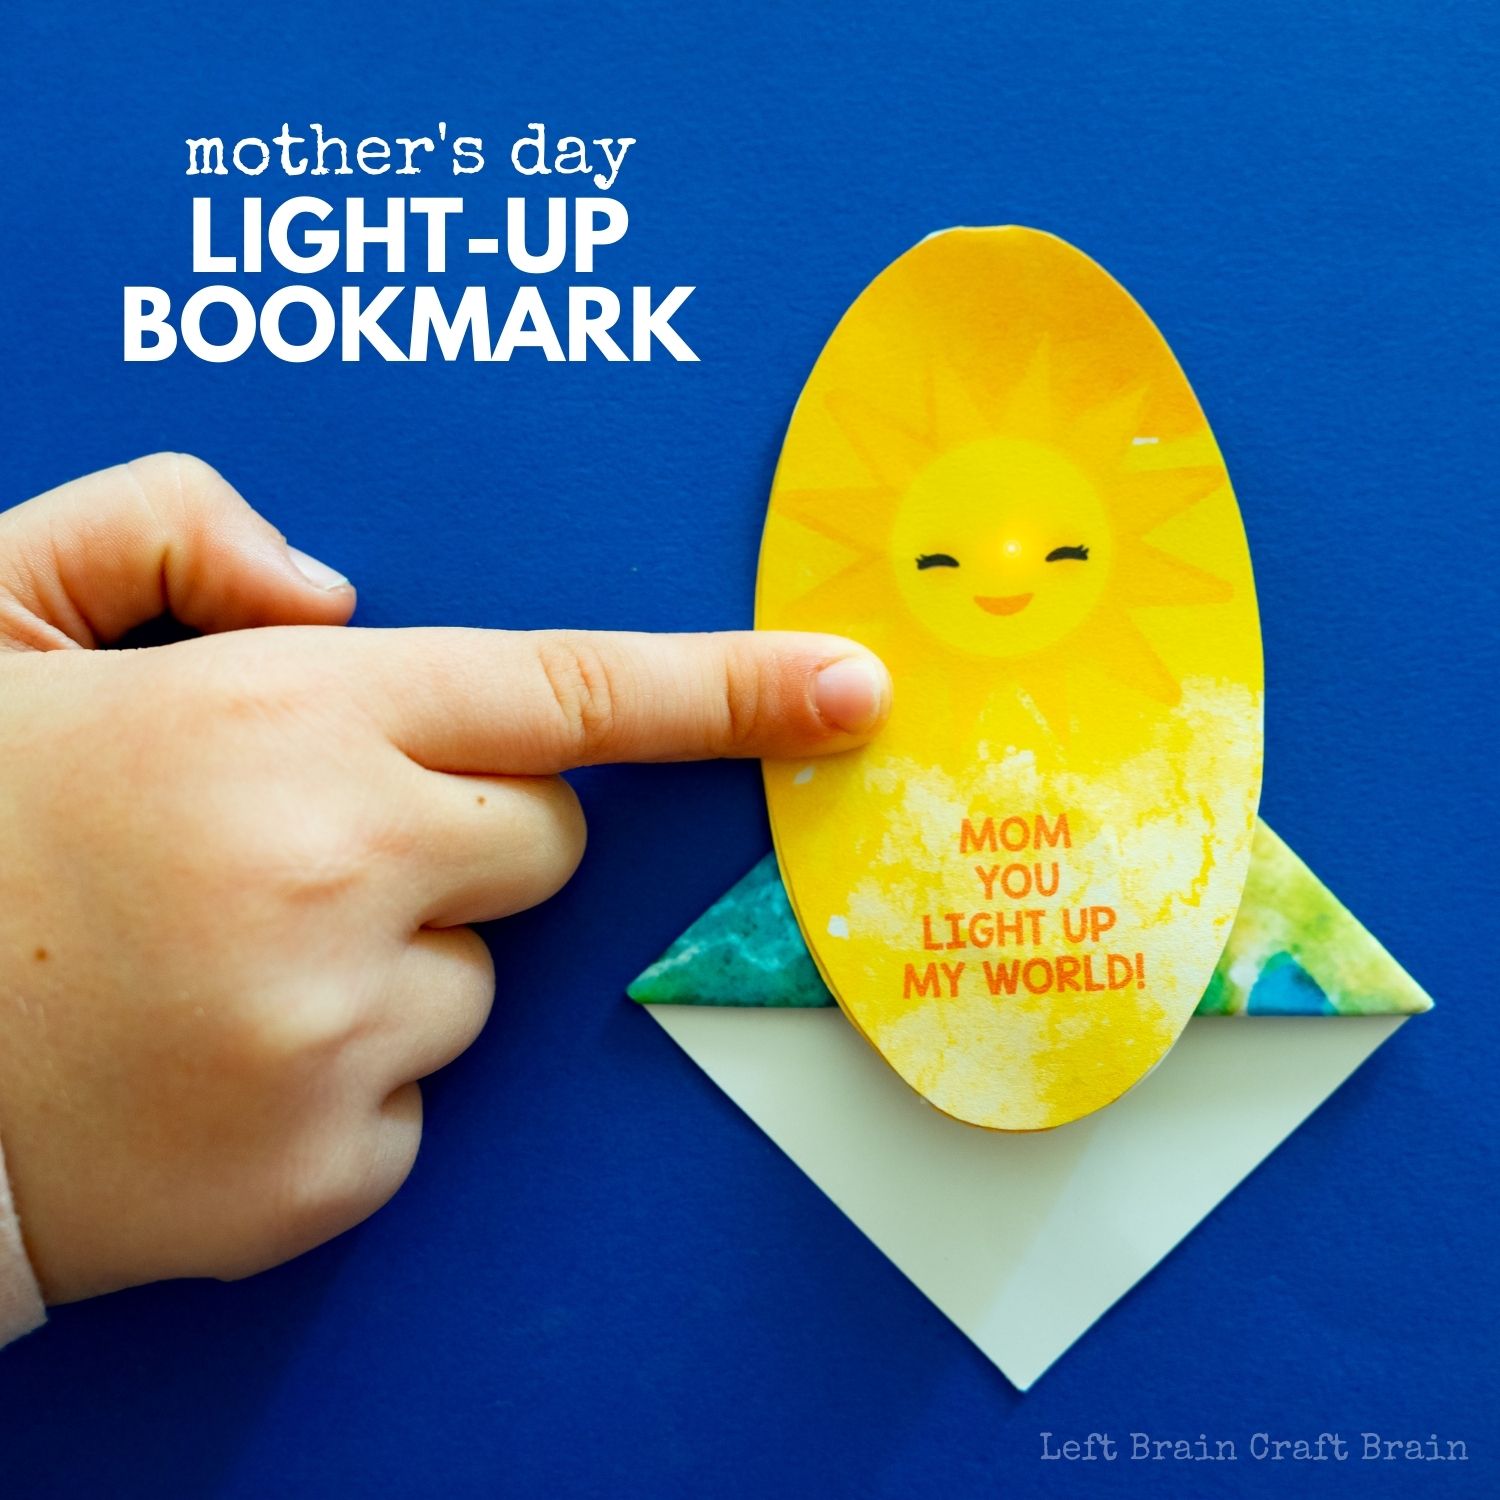 Mothers-Day-Light-Up-Bookmark-1500x1500-1